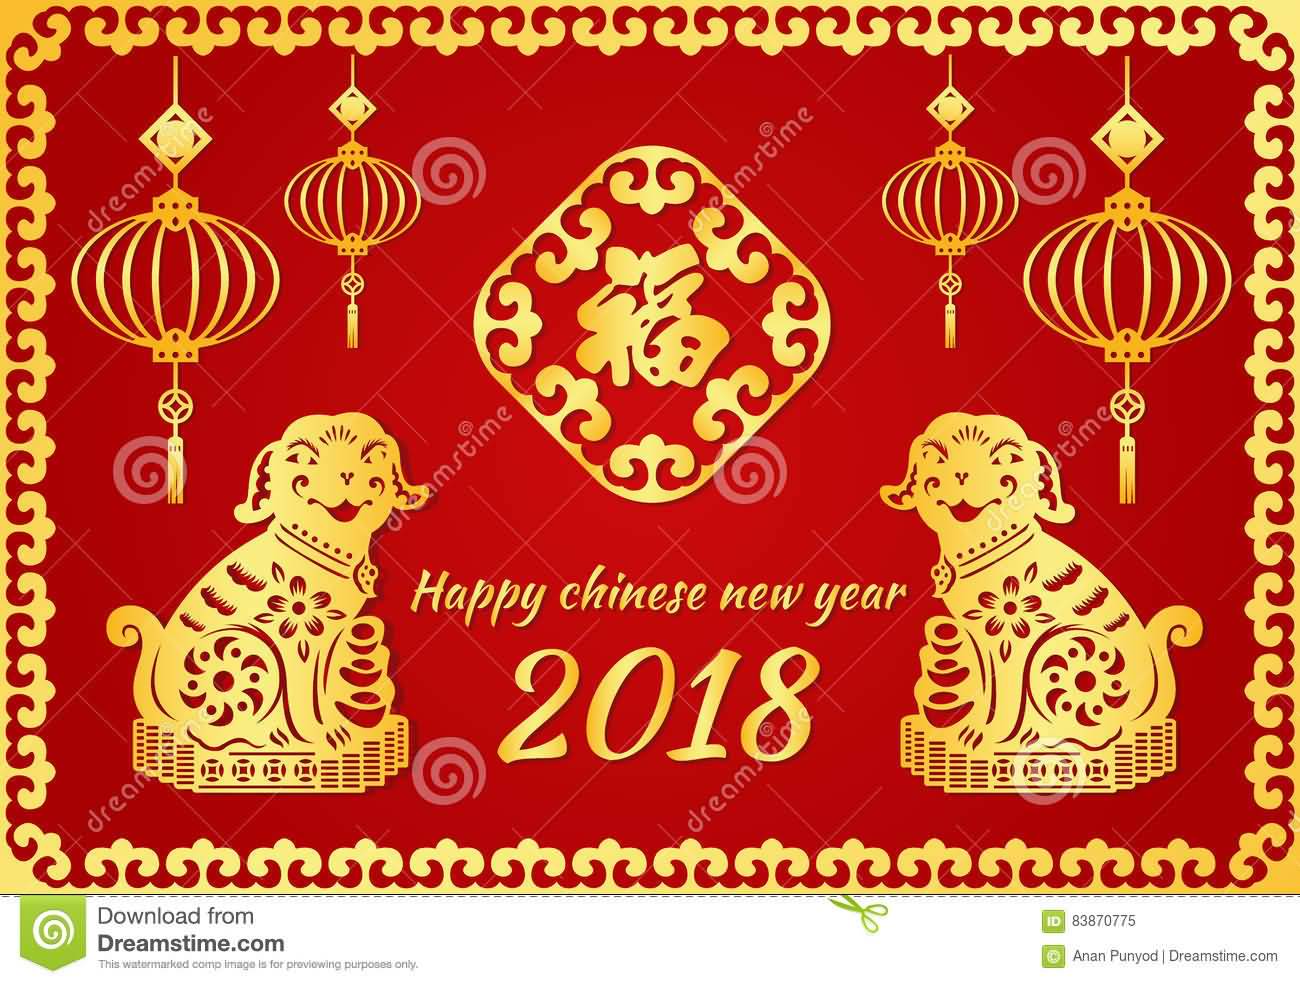 Happy Chinese New Year 2018 Cards Image Picture Photo Wallpaper 05